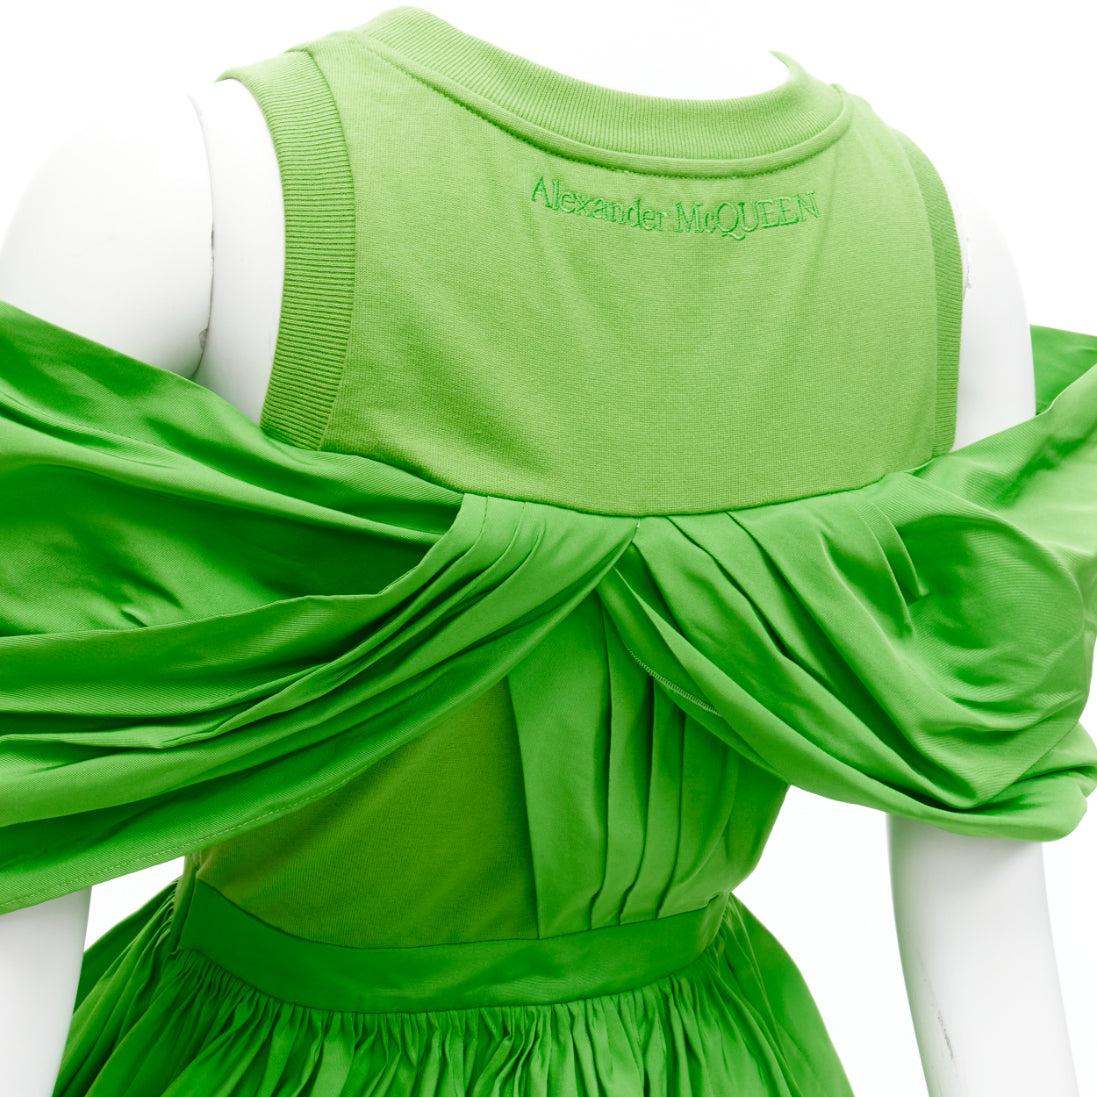 ALEXANDER MCQUEEN 2023 green cotton pleated peplum faille cold shoulder top IT38 XS
Reference: AAWC/A00537
Brand: Alexander McQueen
Collection: 2023
Material: Cotton, Polyester
Color: Green
Pattern: Solid
Closure: Zip
Lining: Green Fabric
Extra